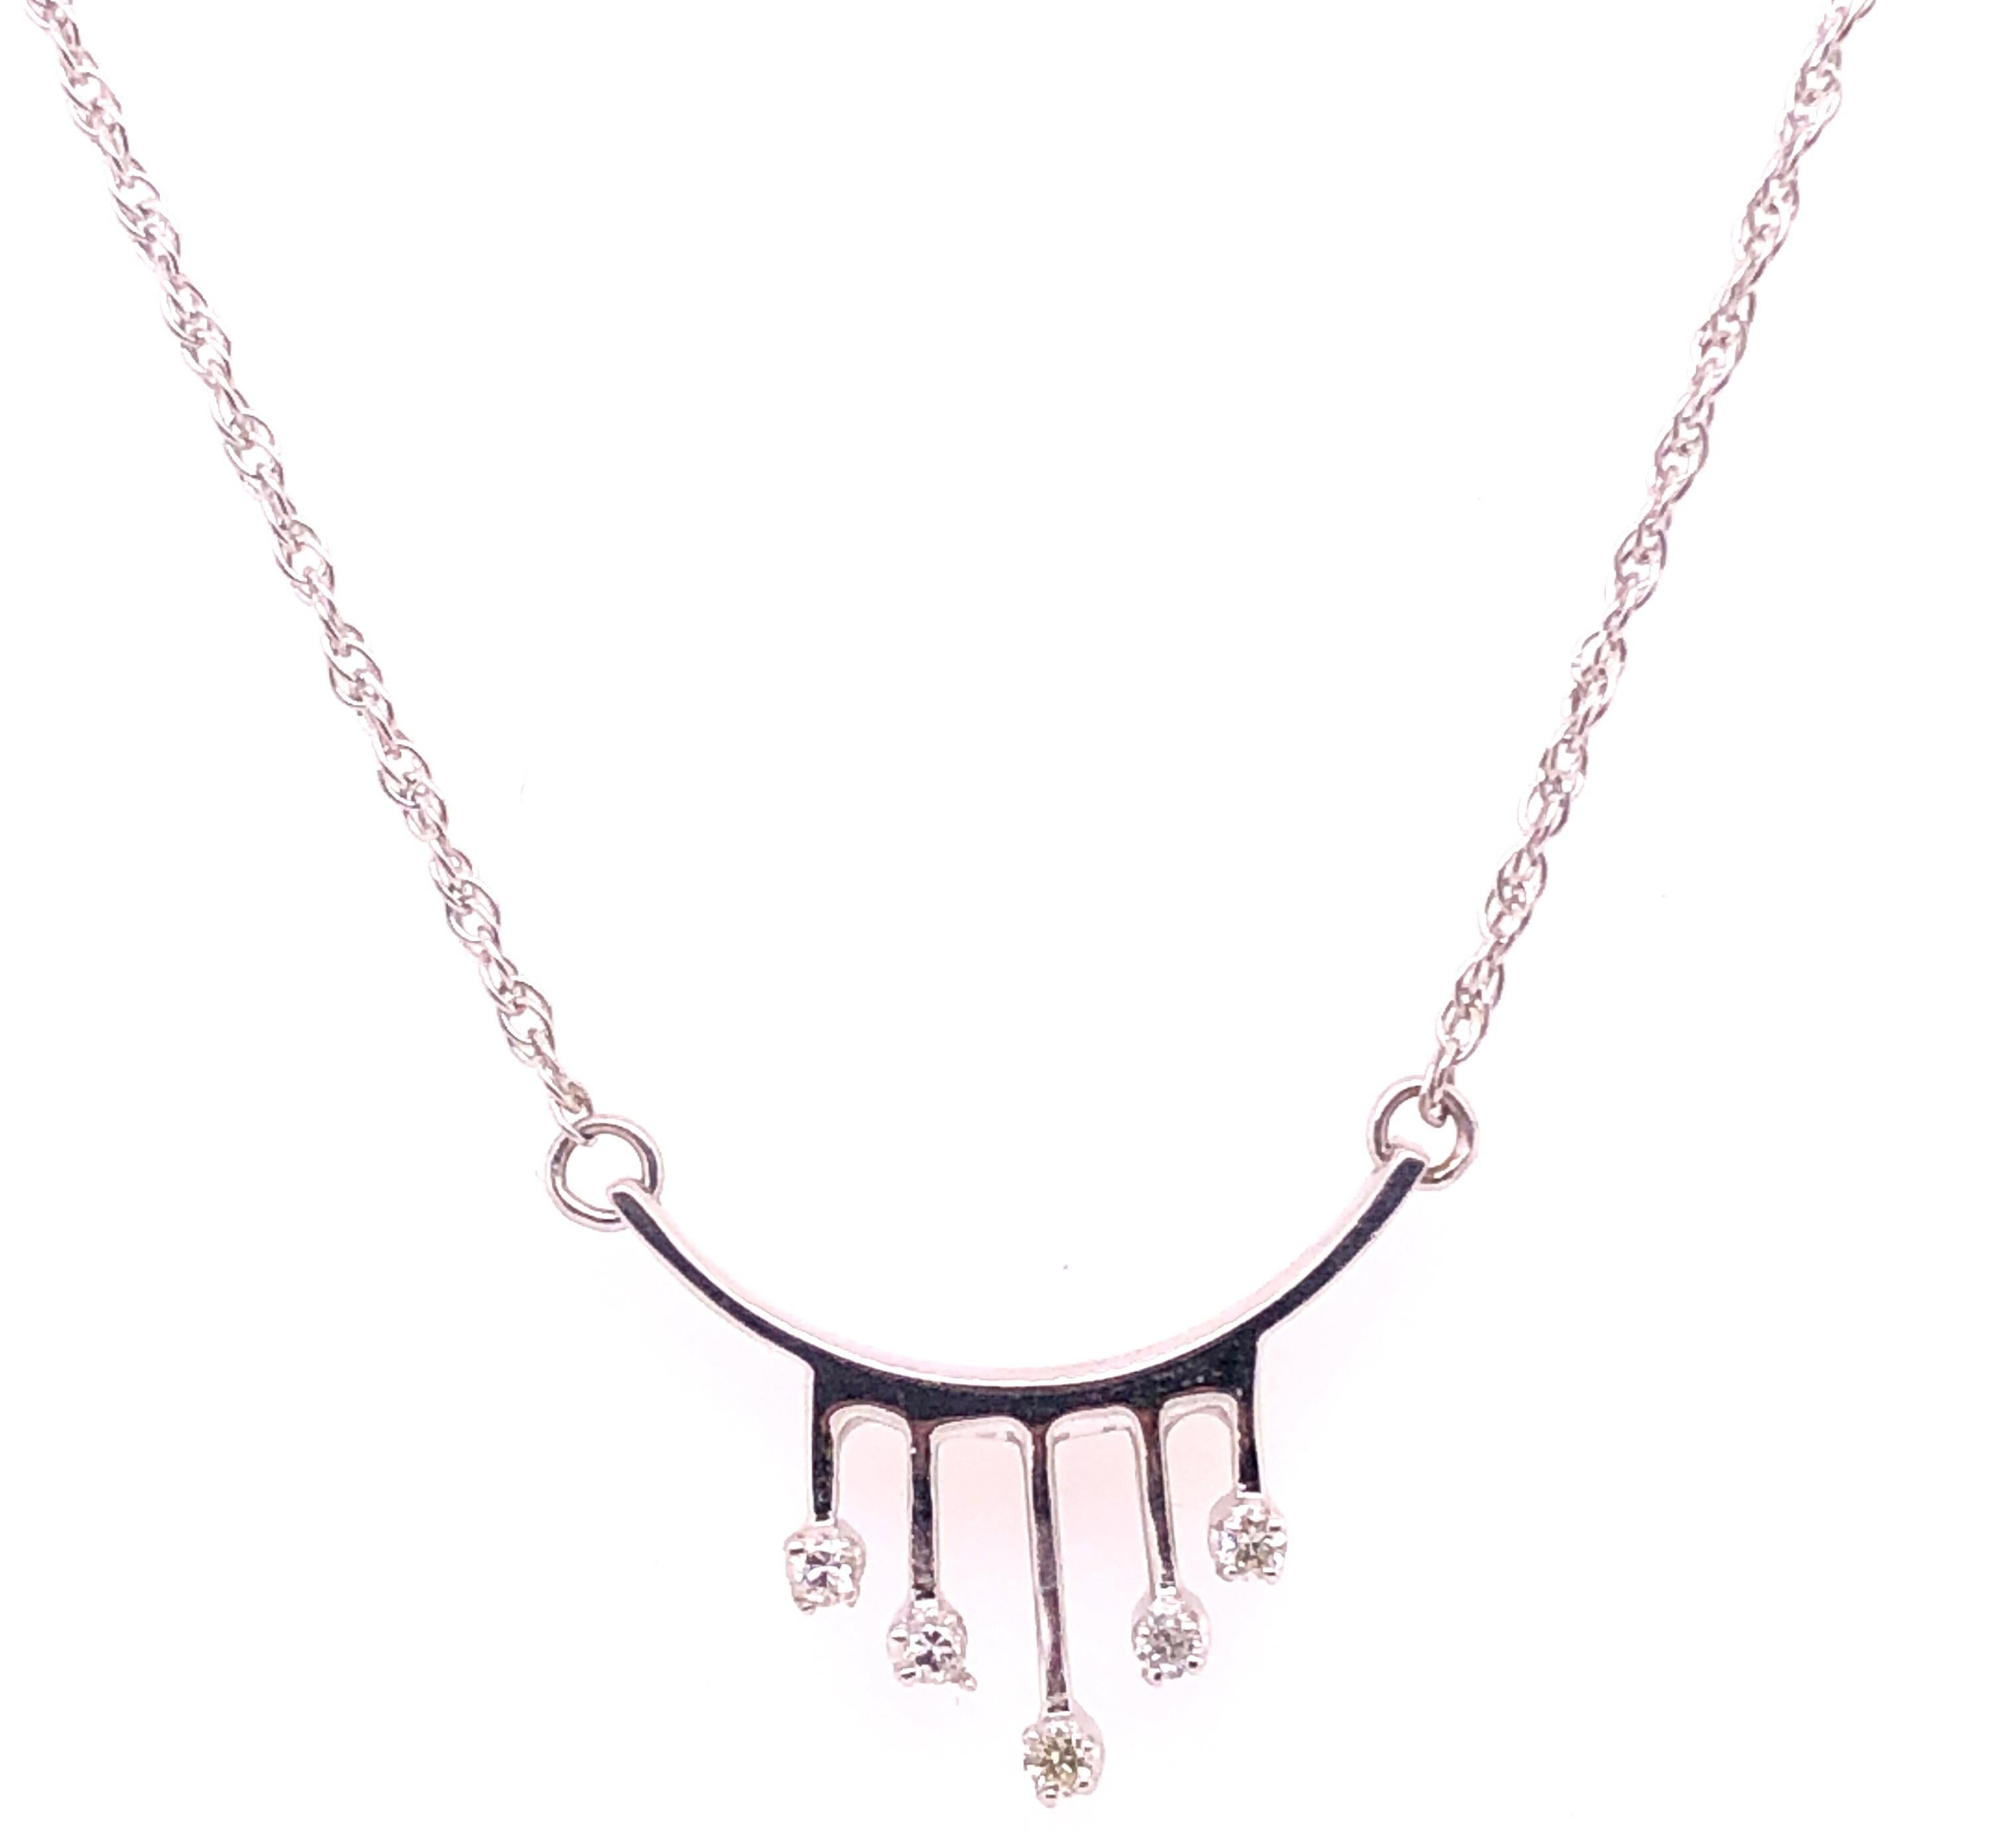 Contemporary 14 Karat White Gold Fancy Necklace with Diamonds For Sale